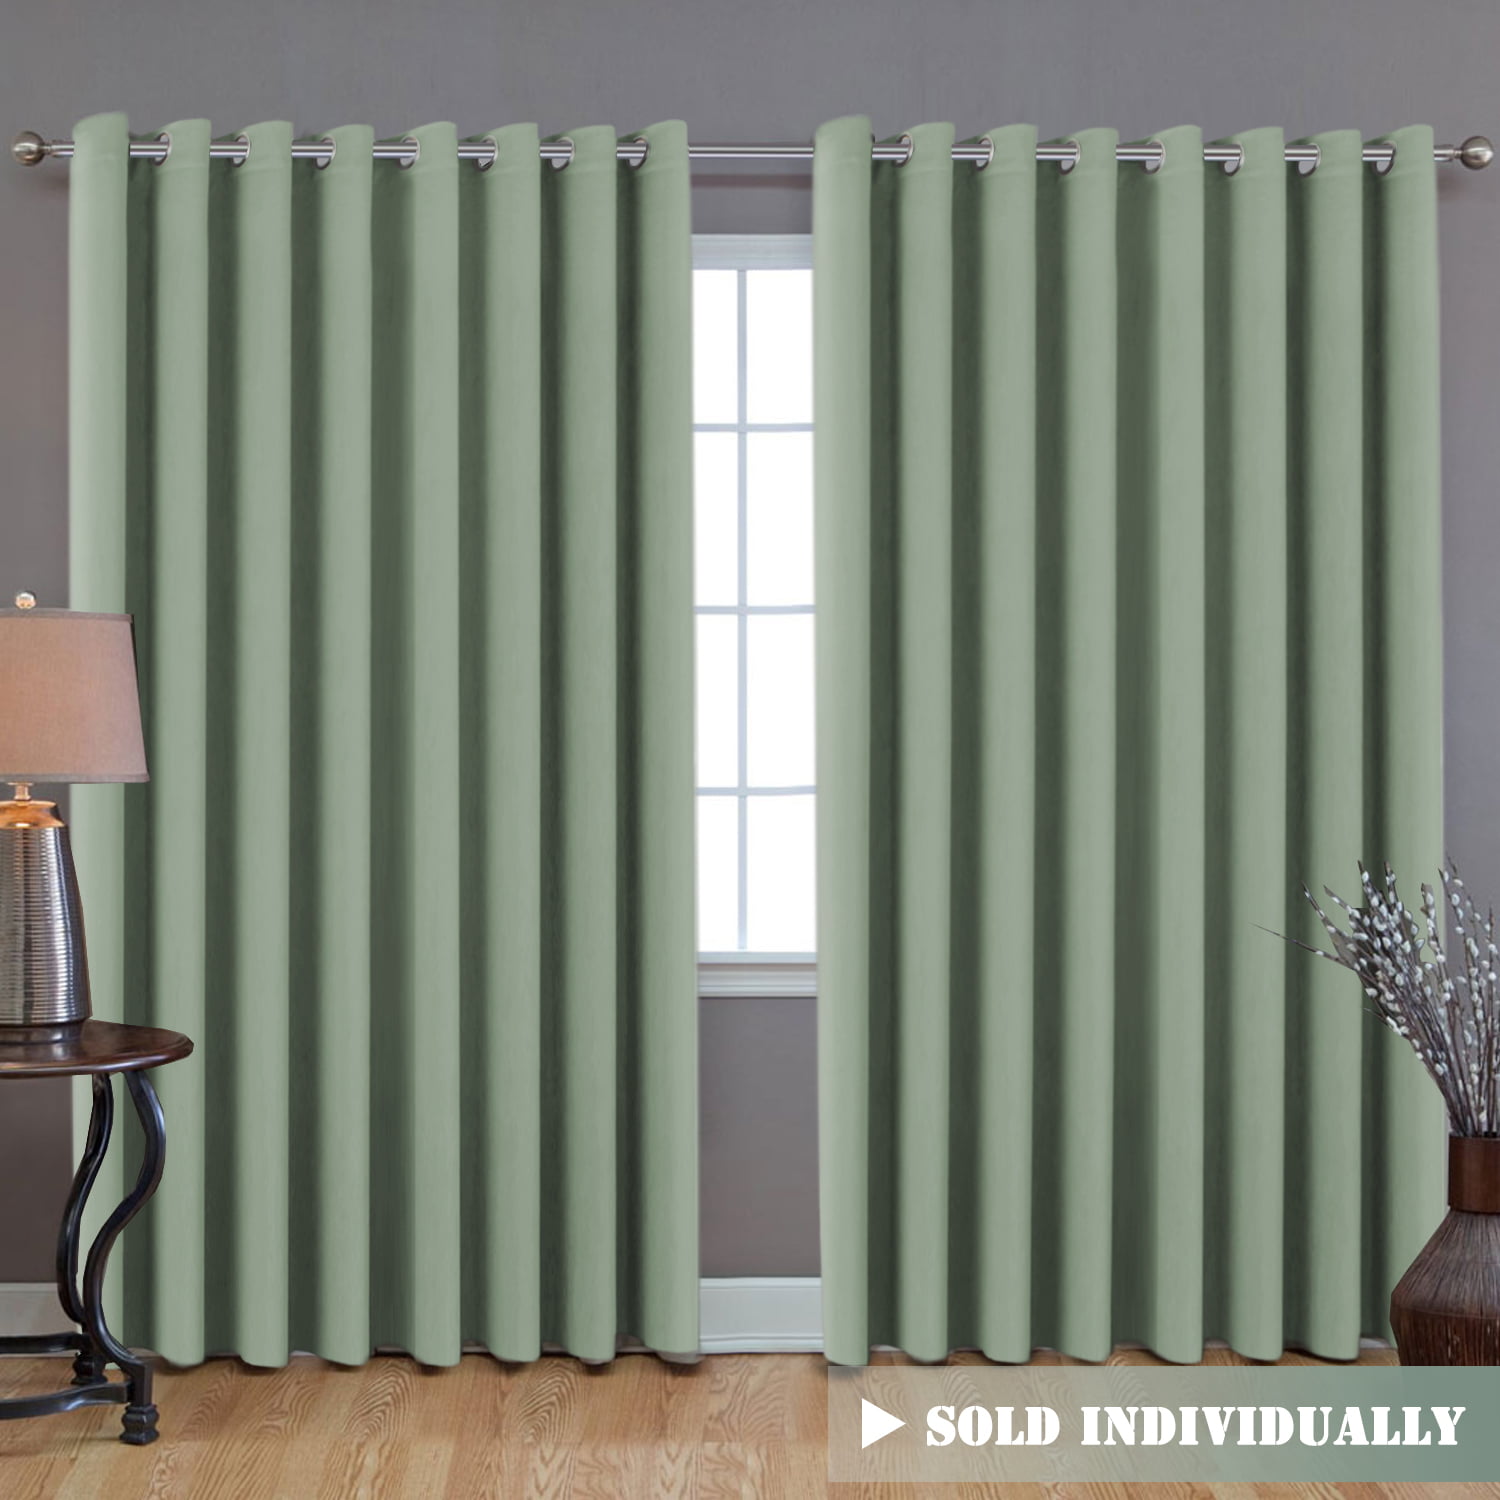 Ultra Blackout Wider Curtain, Extra Long and Wide Thermal Insulated